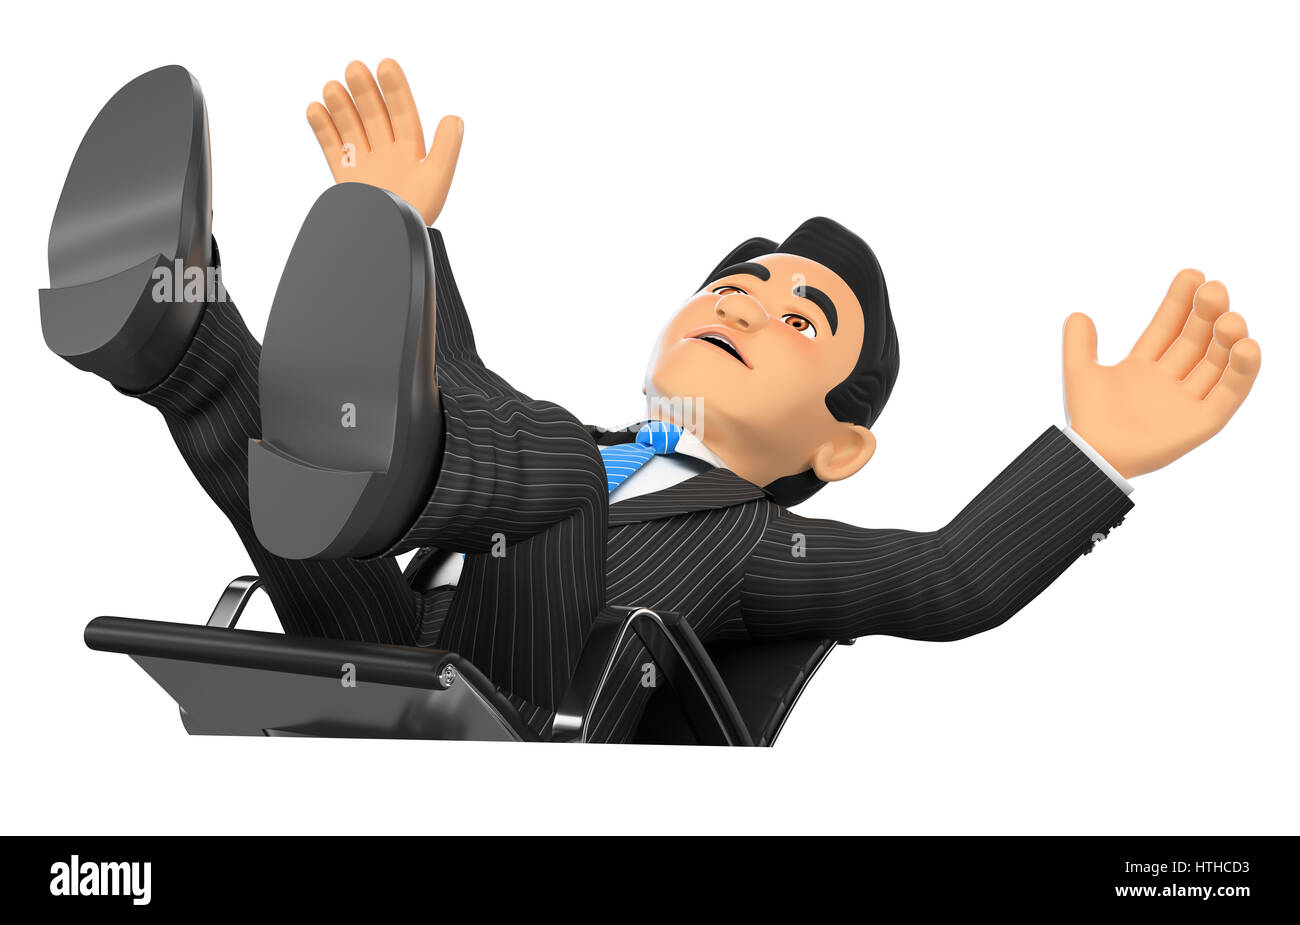 3d business people illustration. Businessman scared falling off his office chair. Isolated white background. Stock Photo